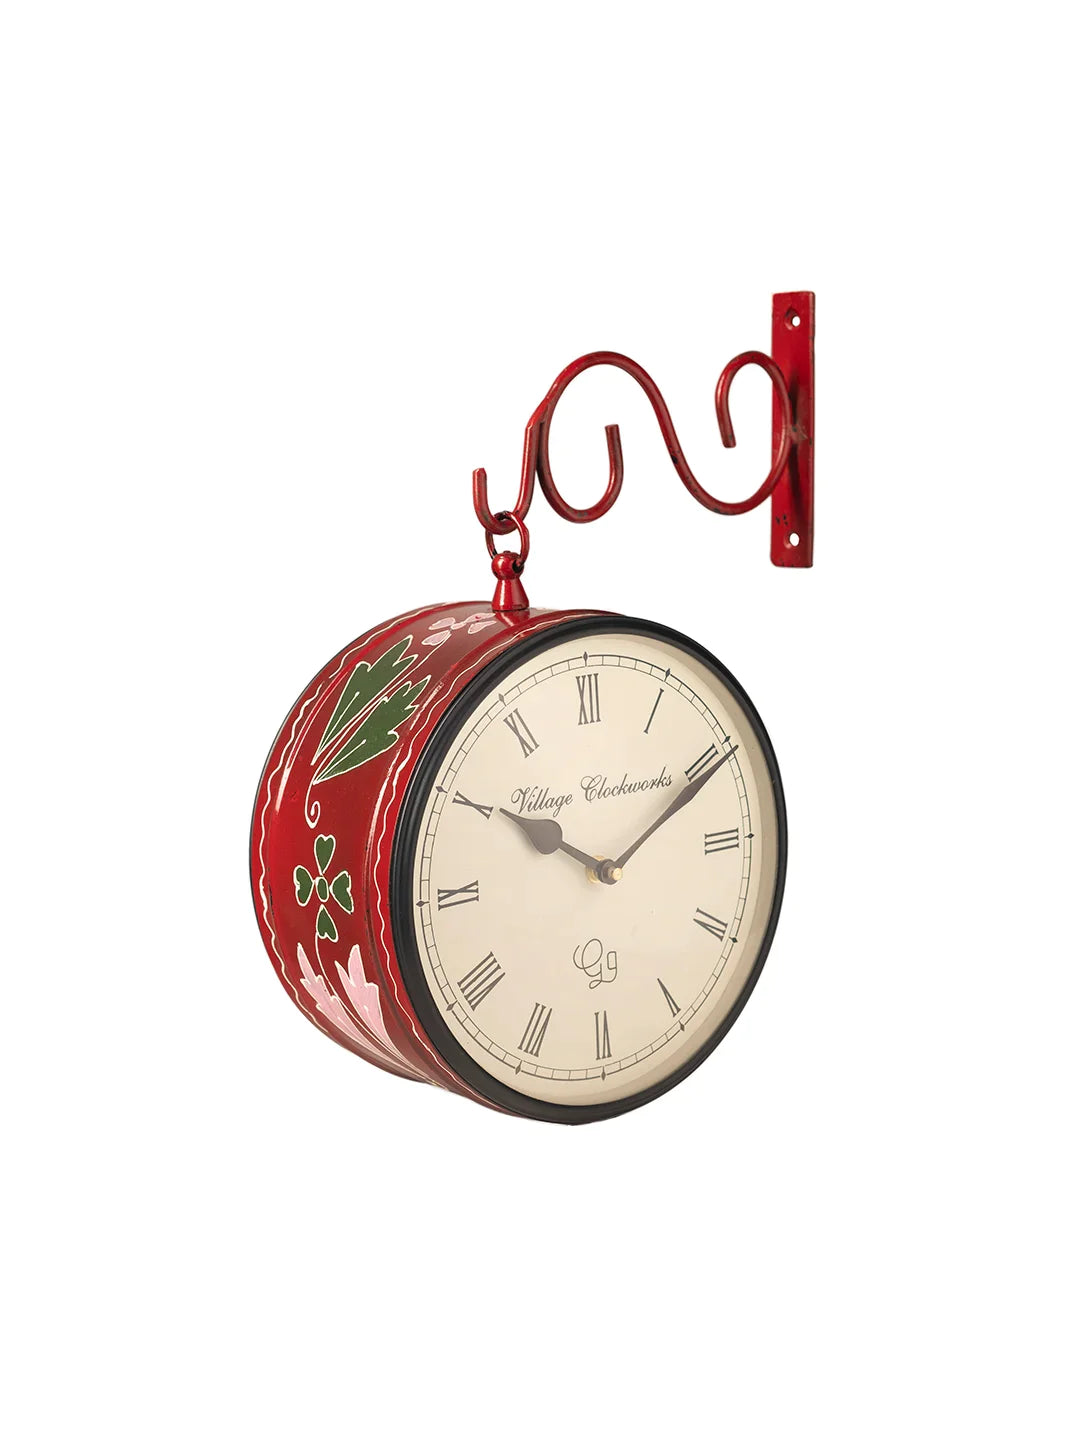 Metal Round Station Clock Handpainted Red 8 Inches Wall Clock